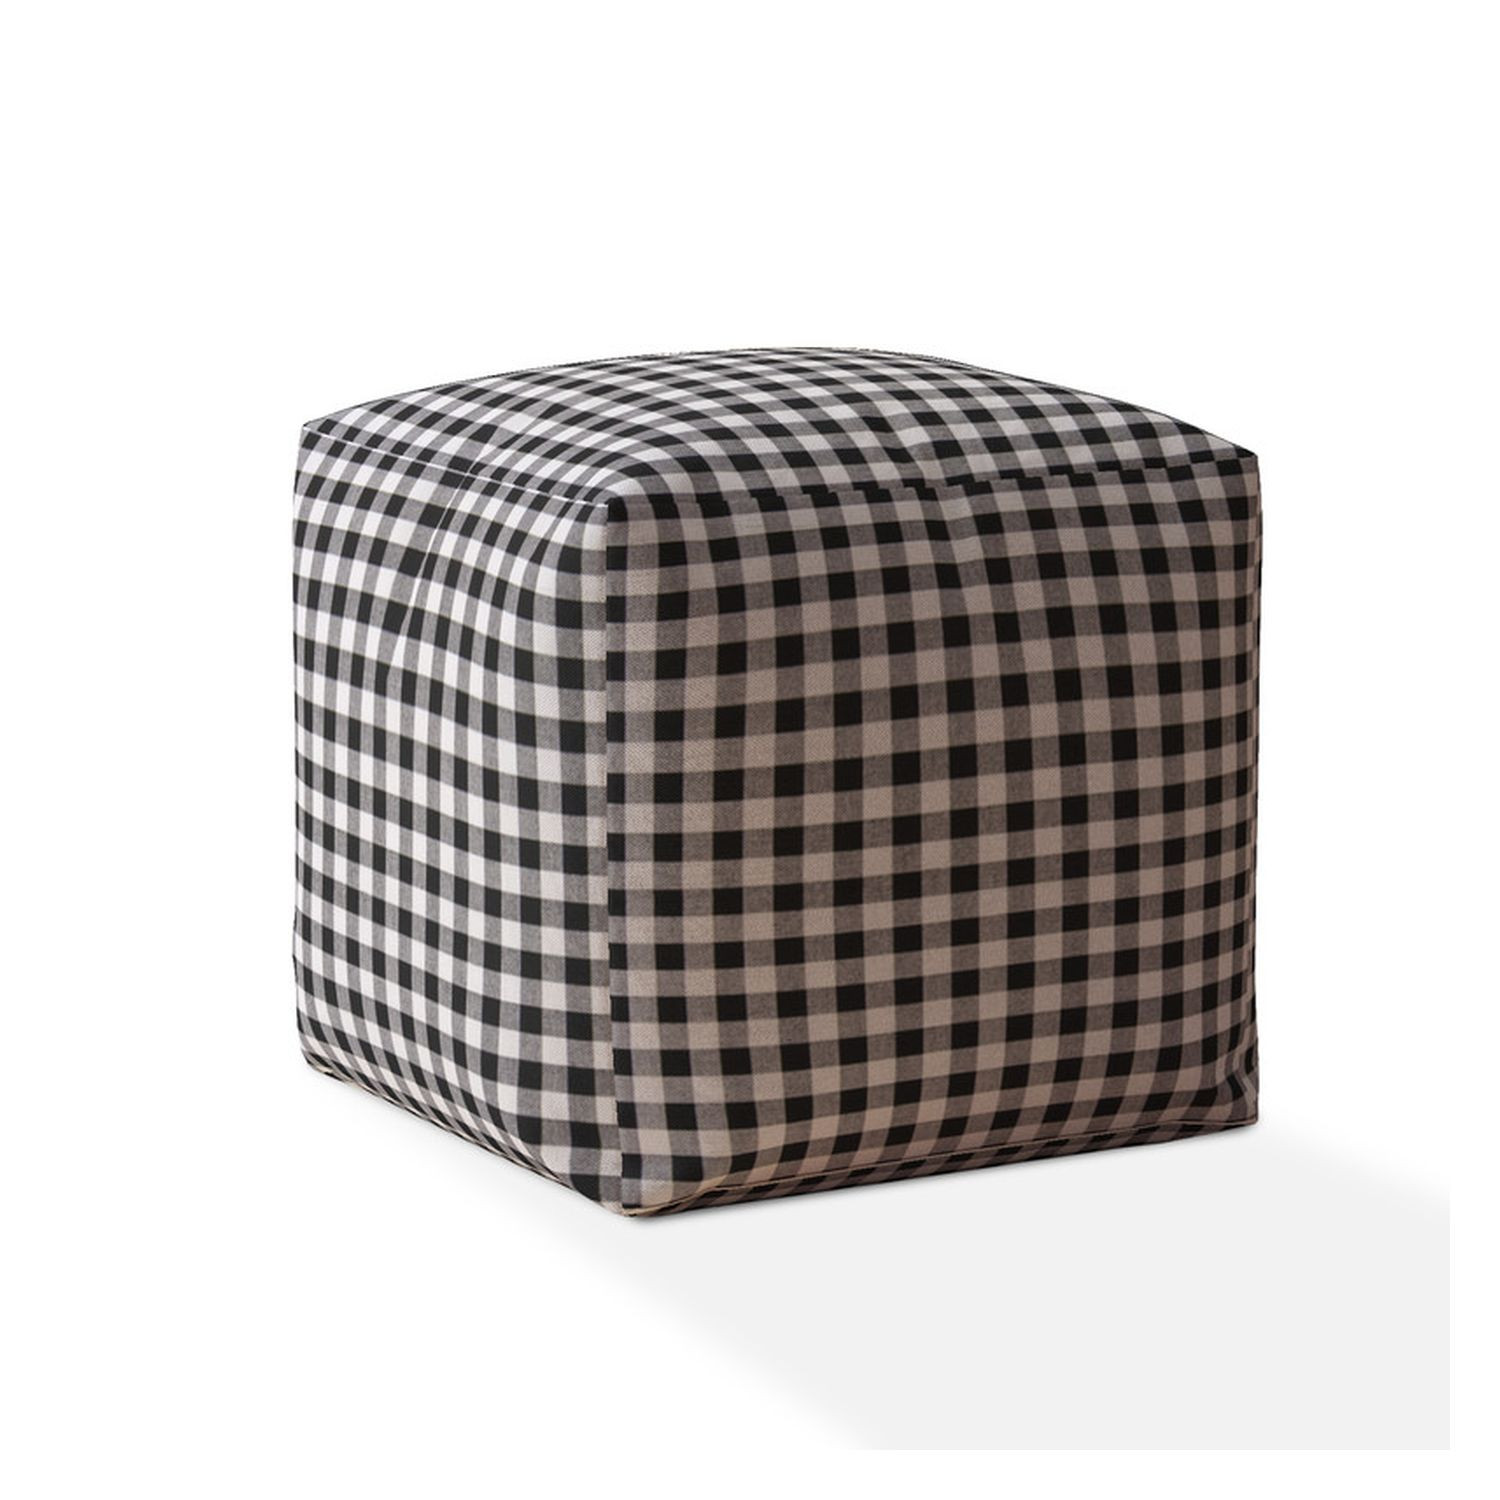 17" Black And Gray Cotton Gingham Pouf Cover-518499-1